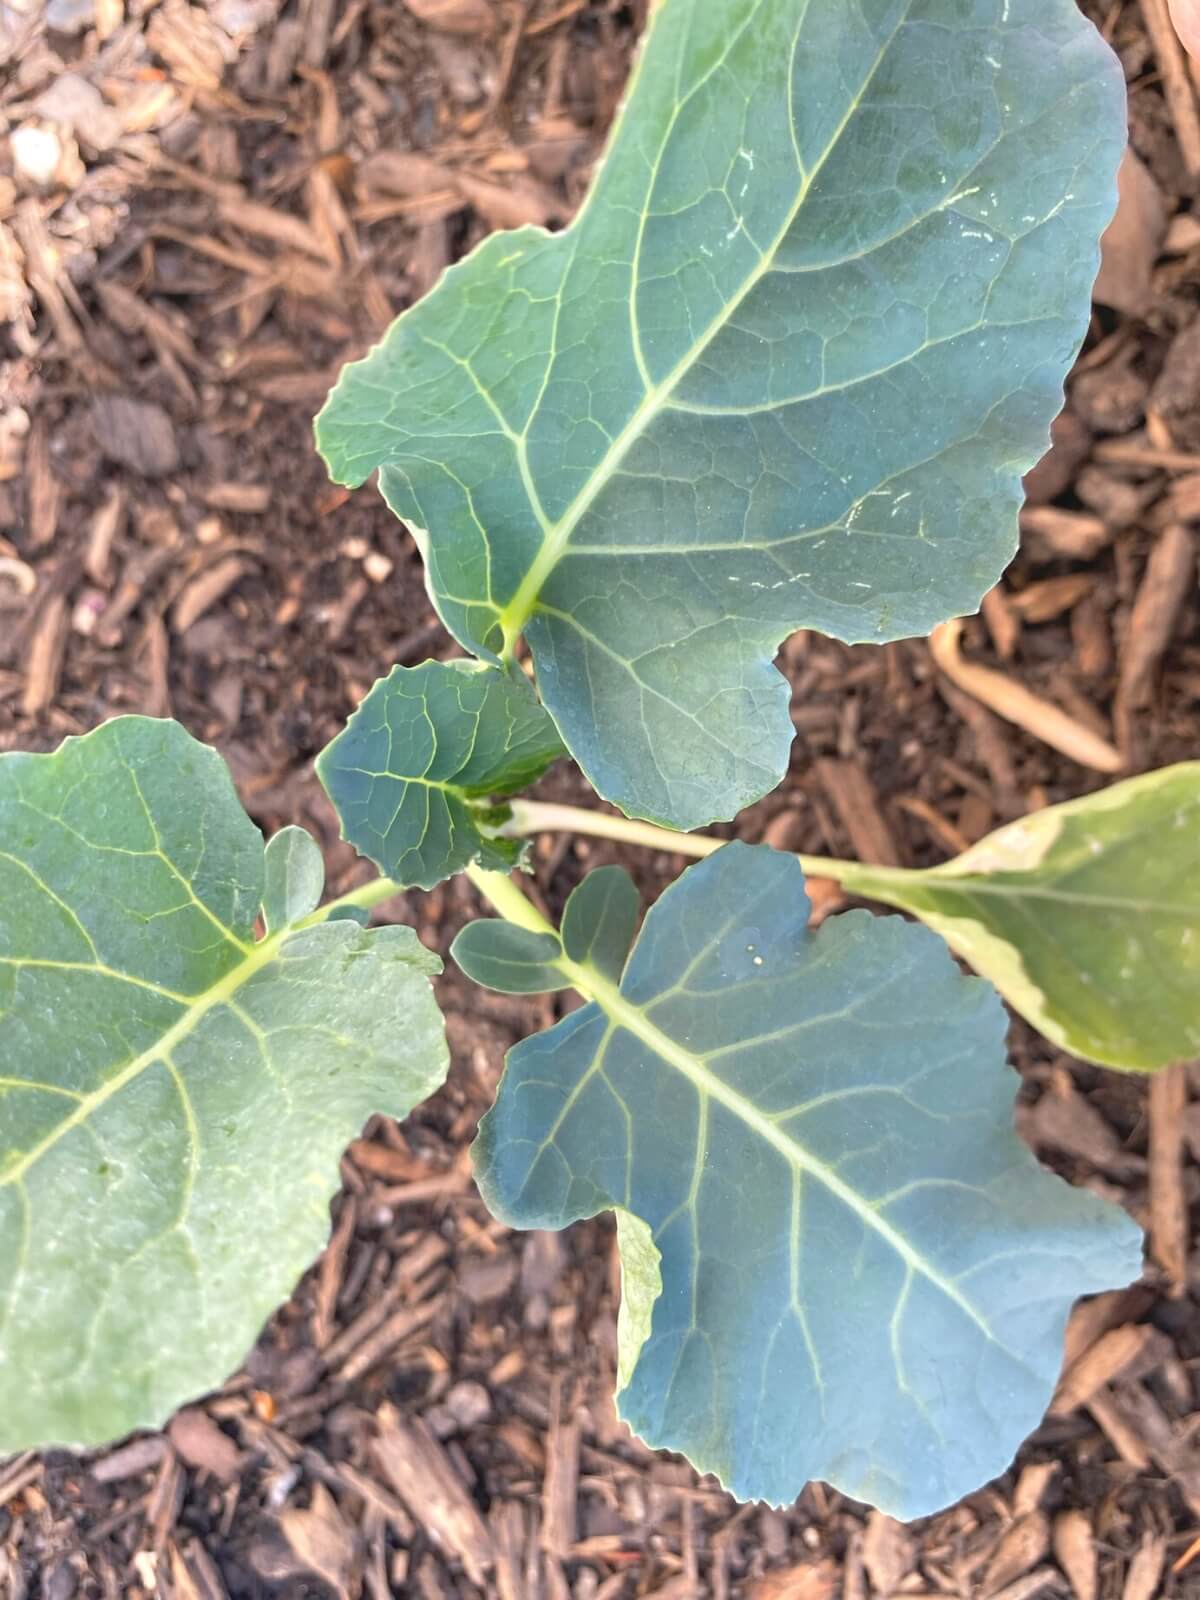 Broccoli Seedling Planted in the Garden